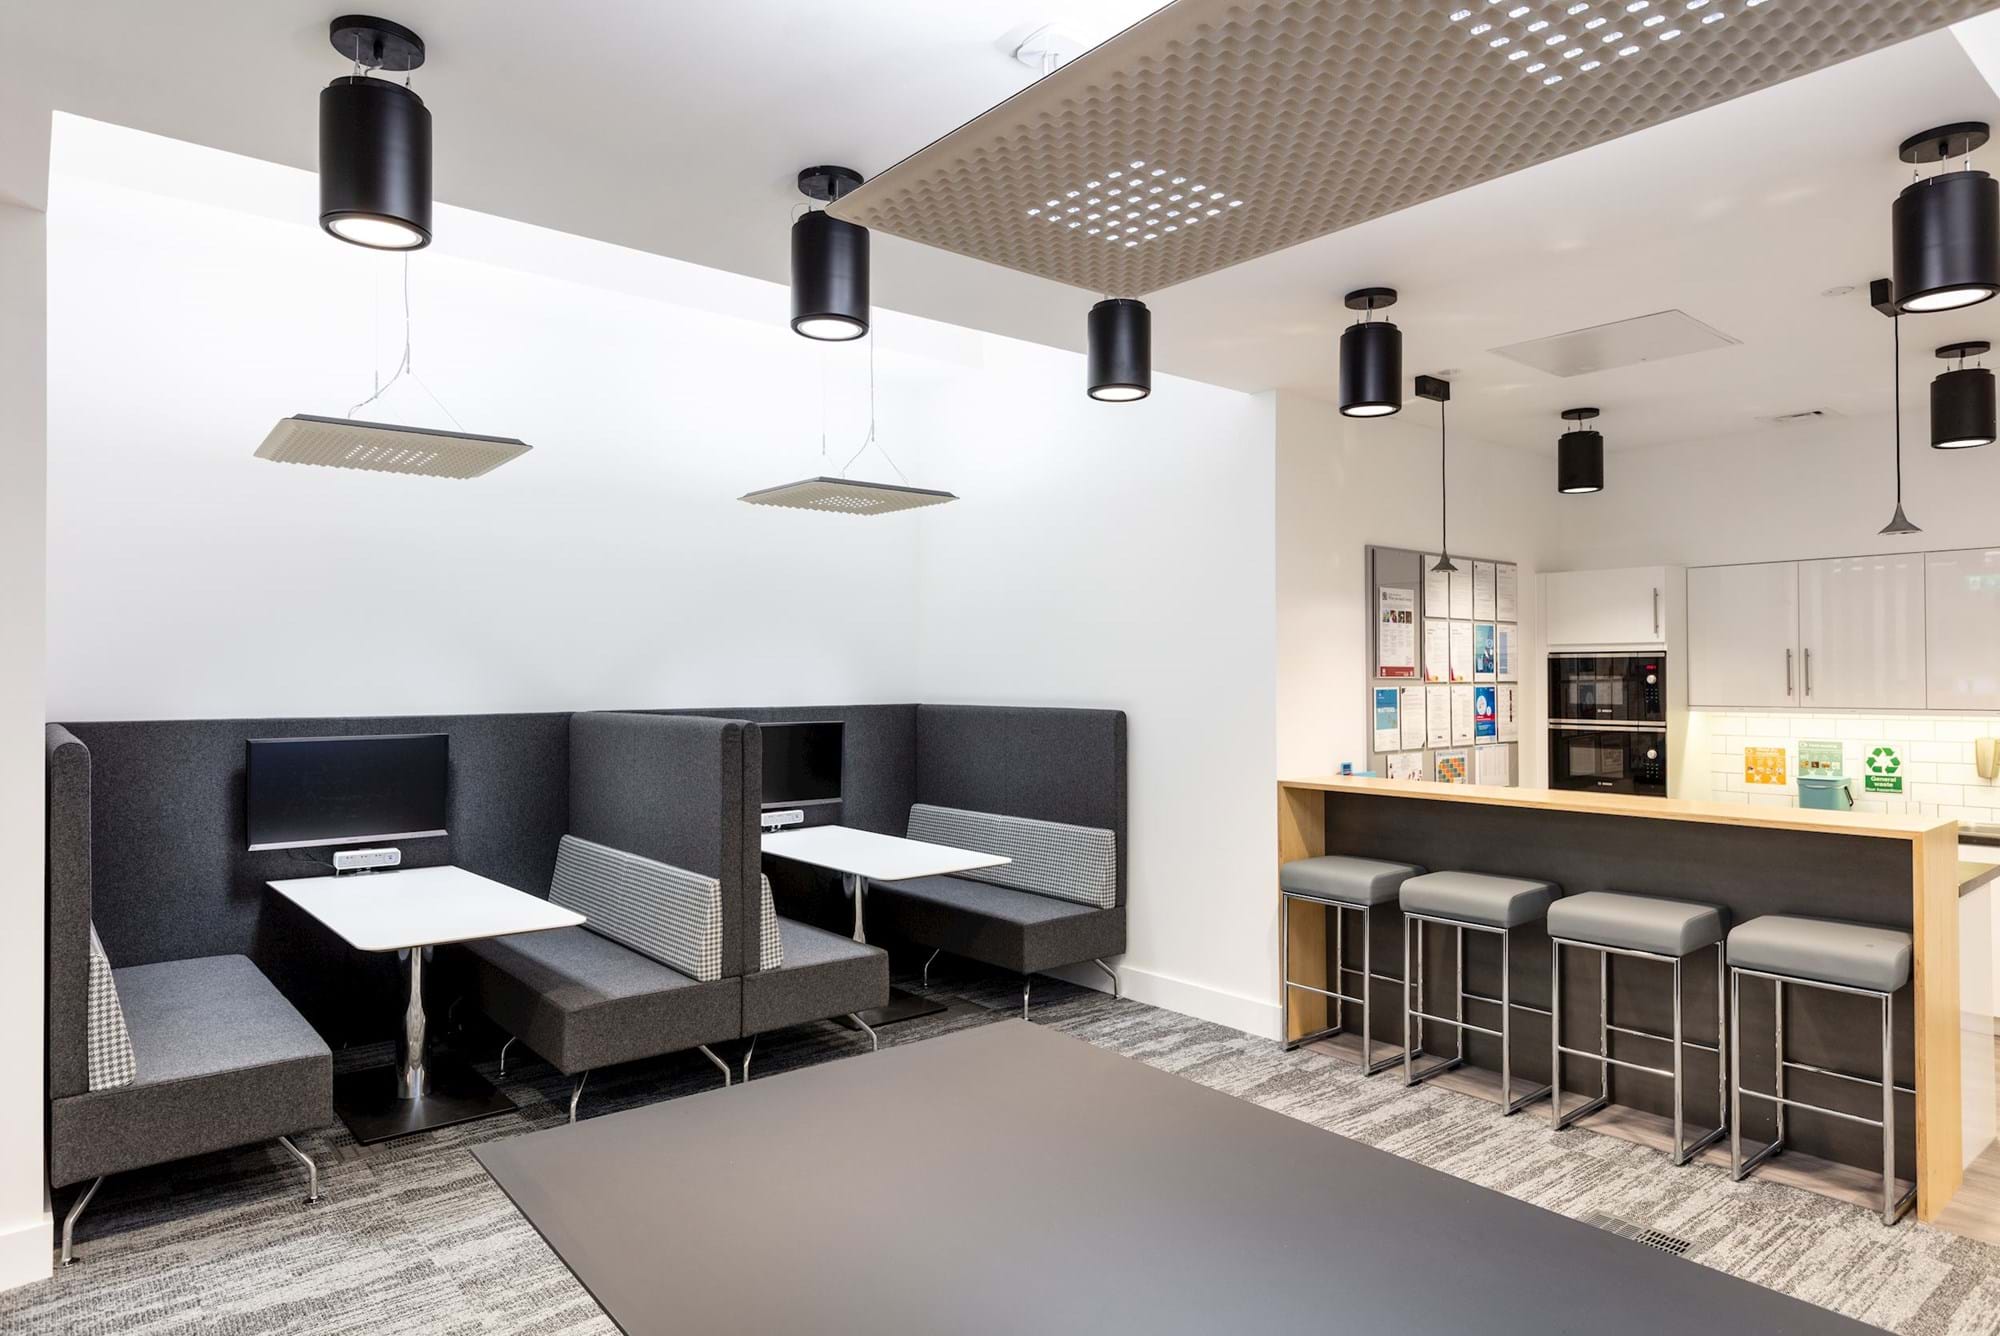 Modus Workspace office design, fit out and refurbishment - Atkins Manchester - Modus_Atkins-62.jpg